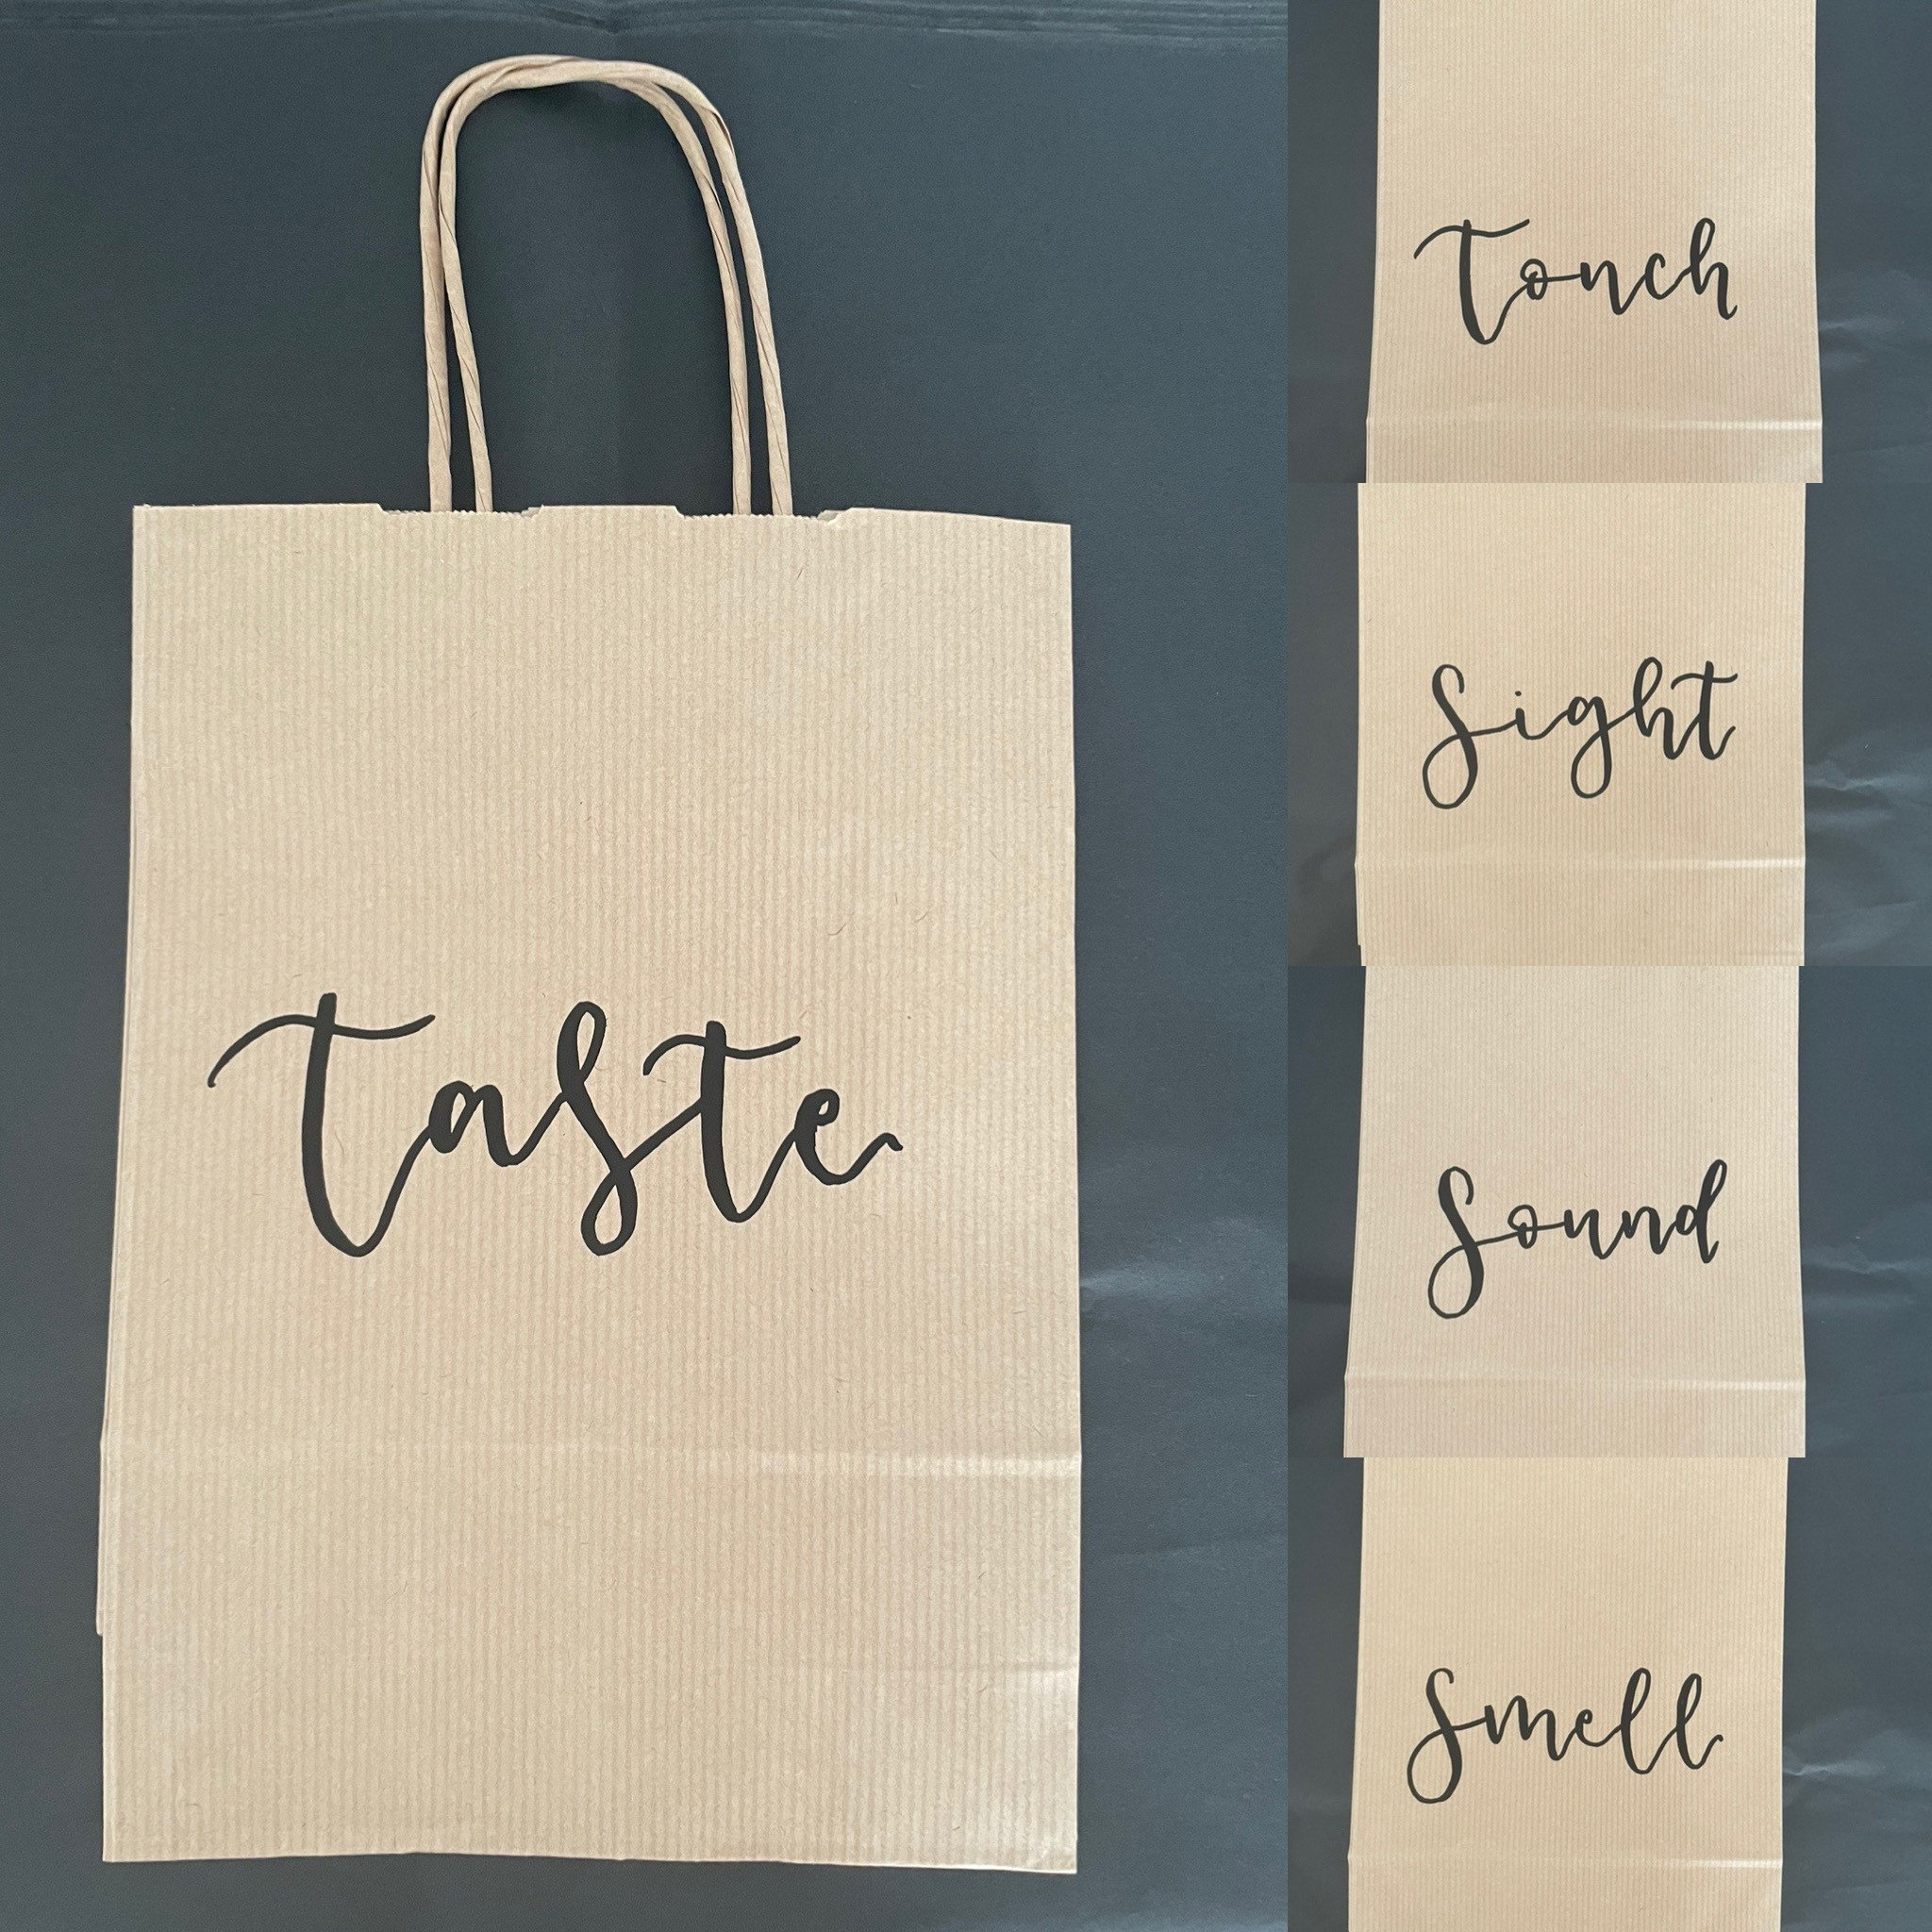 Five Senses Gift Bags by @noted.ink